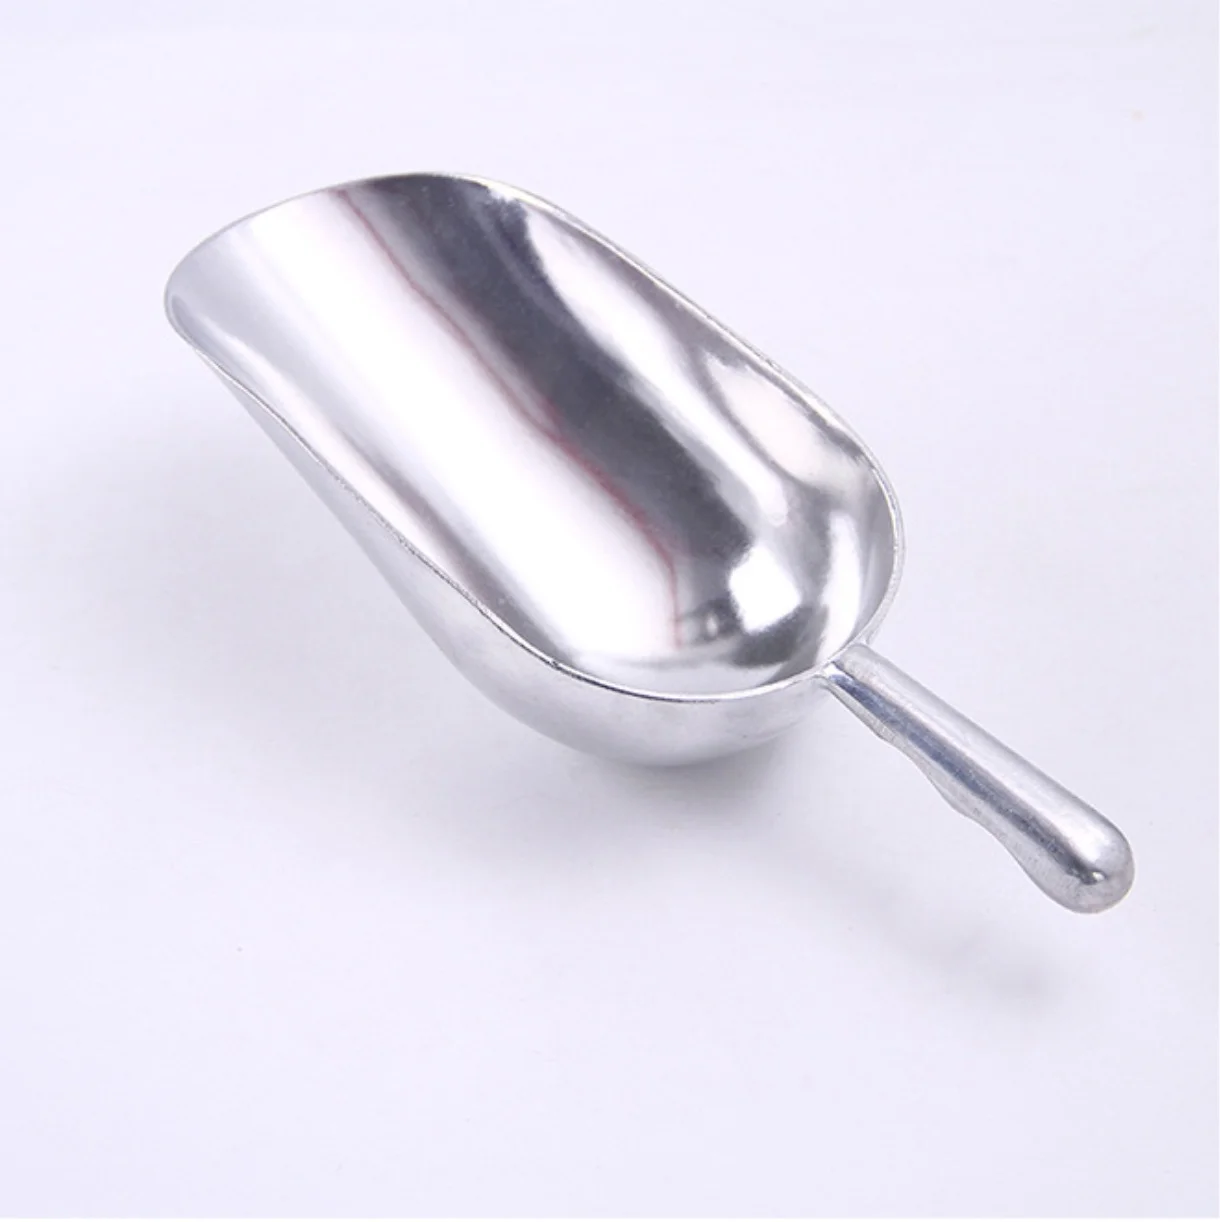 8-13Inch Stainless Steel Ice Scraper Scoop Candy Bar Commercial